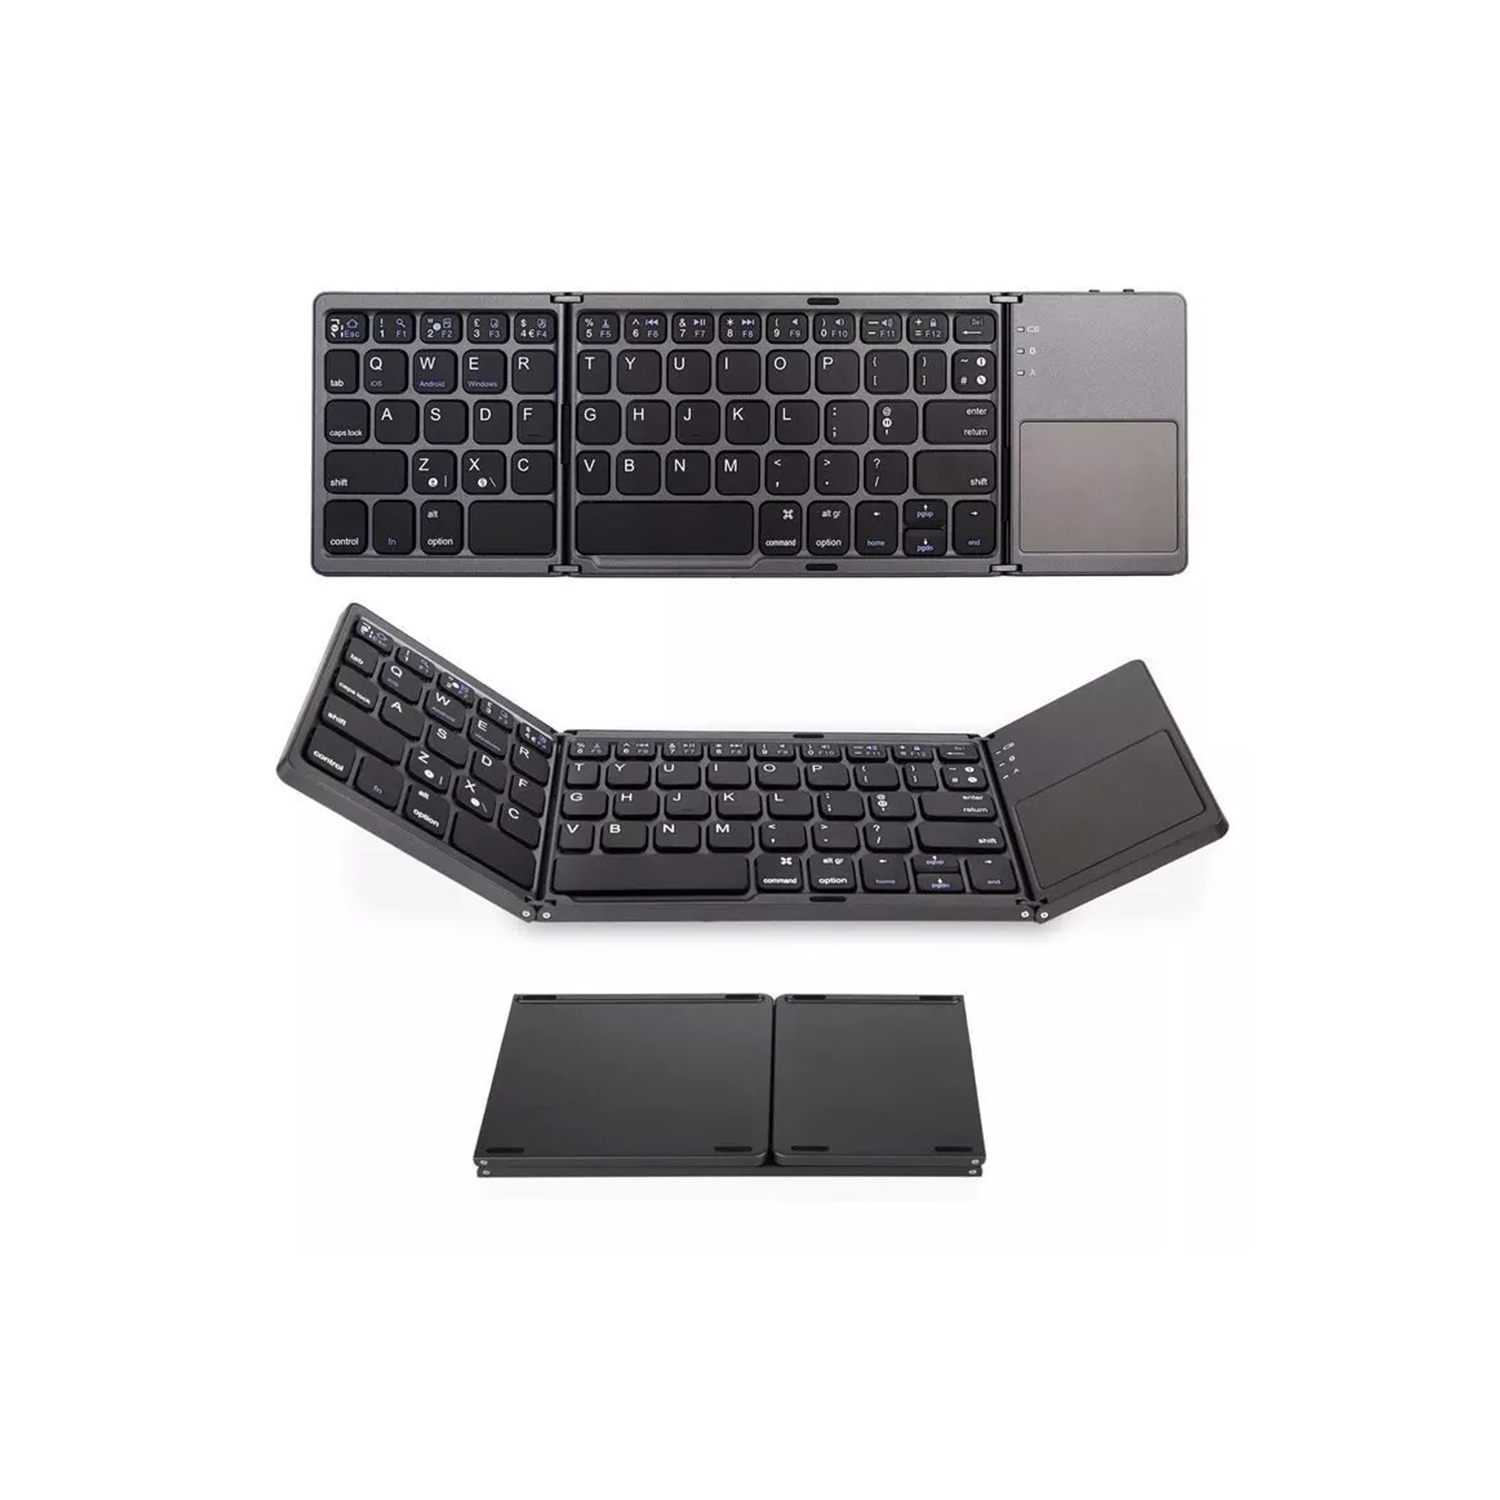 Ultra Slim Foldable Bluetooth Keyboard with Touch Pad Tri-Folding Portable Wireless Pocket mini Keyboard with touchpad Compatible with iPhone iPad Samsung Smartphone Tablet Android iOS Windows & PC